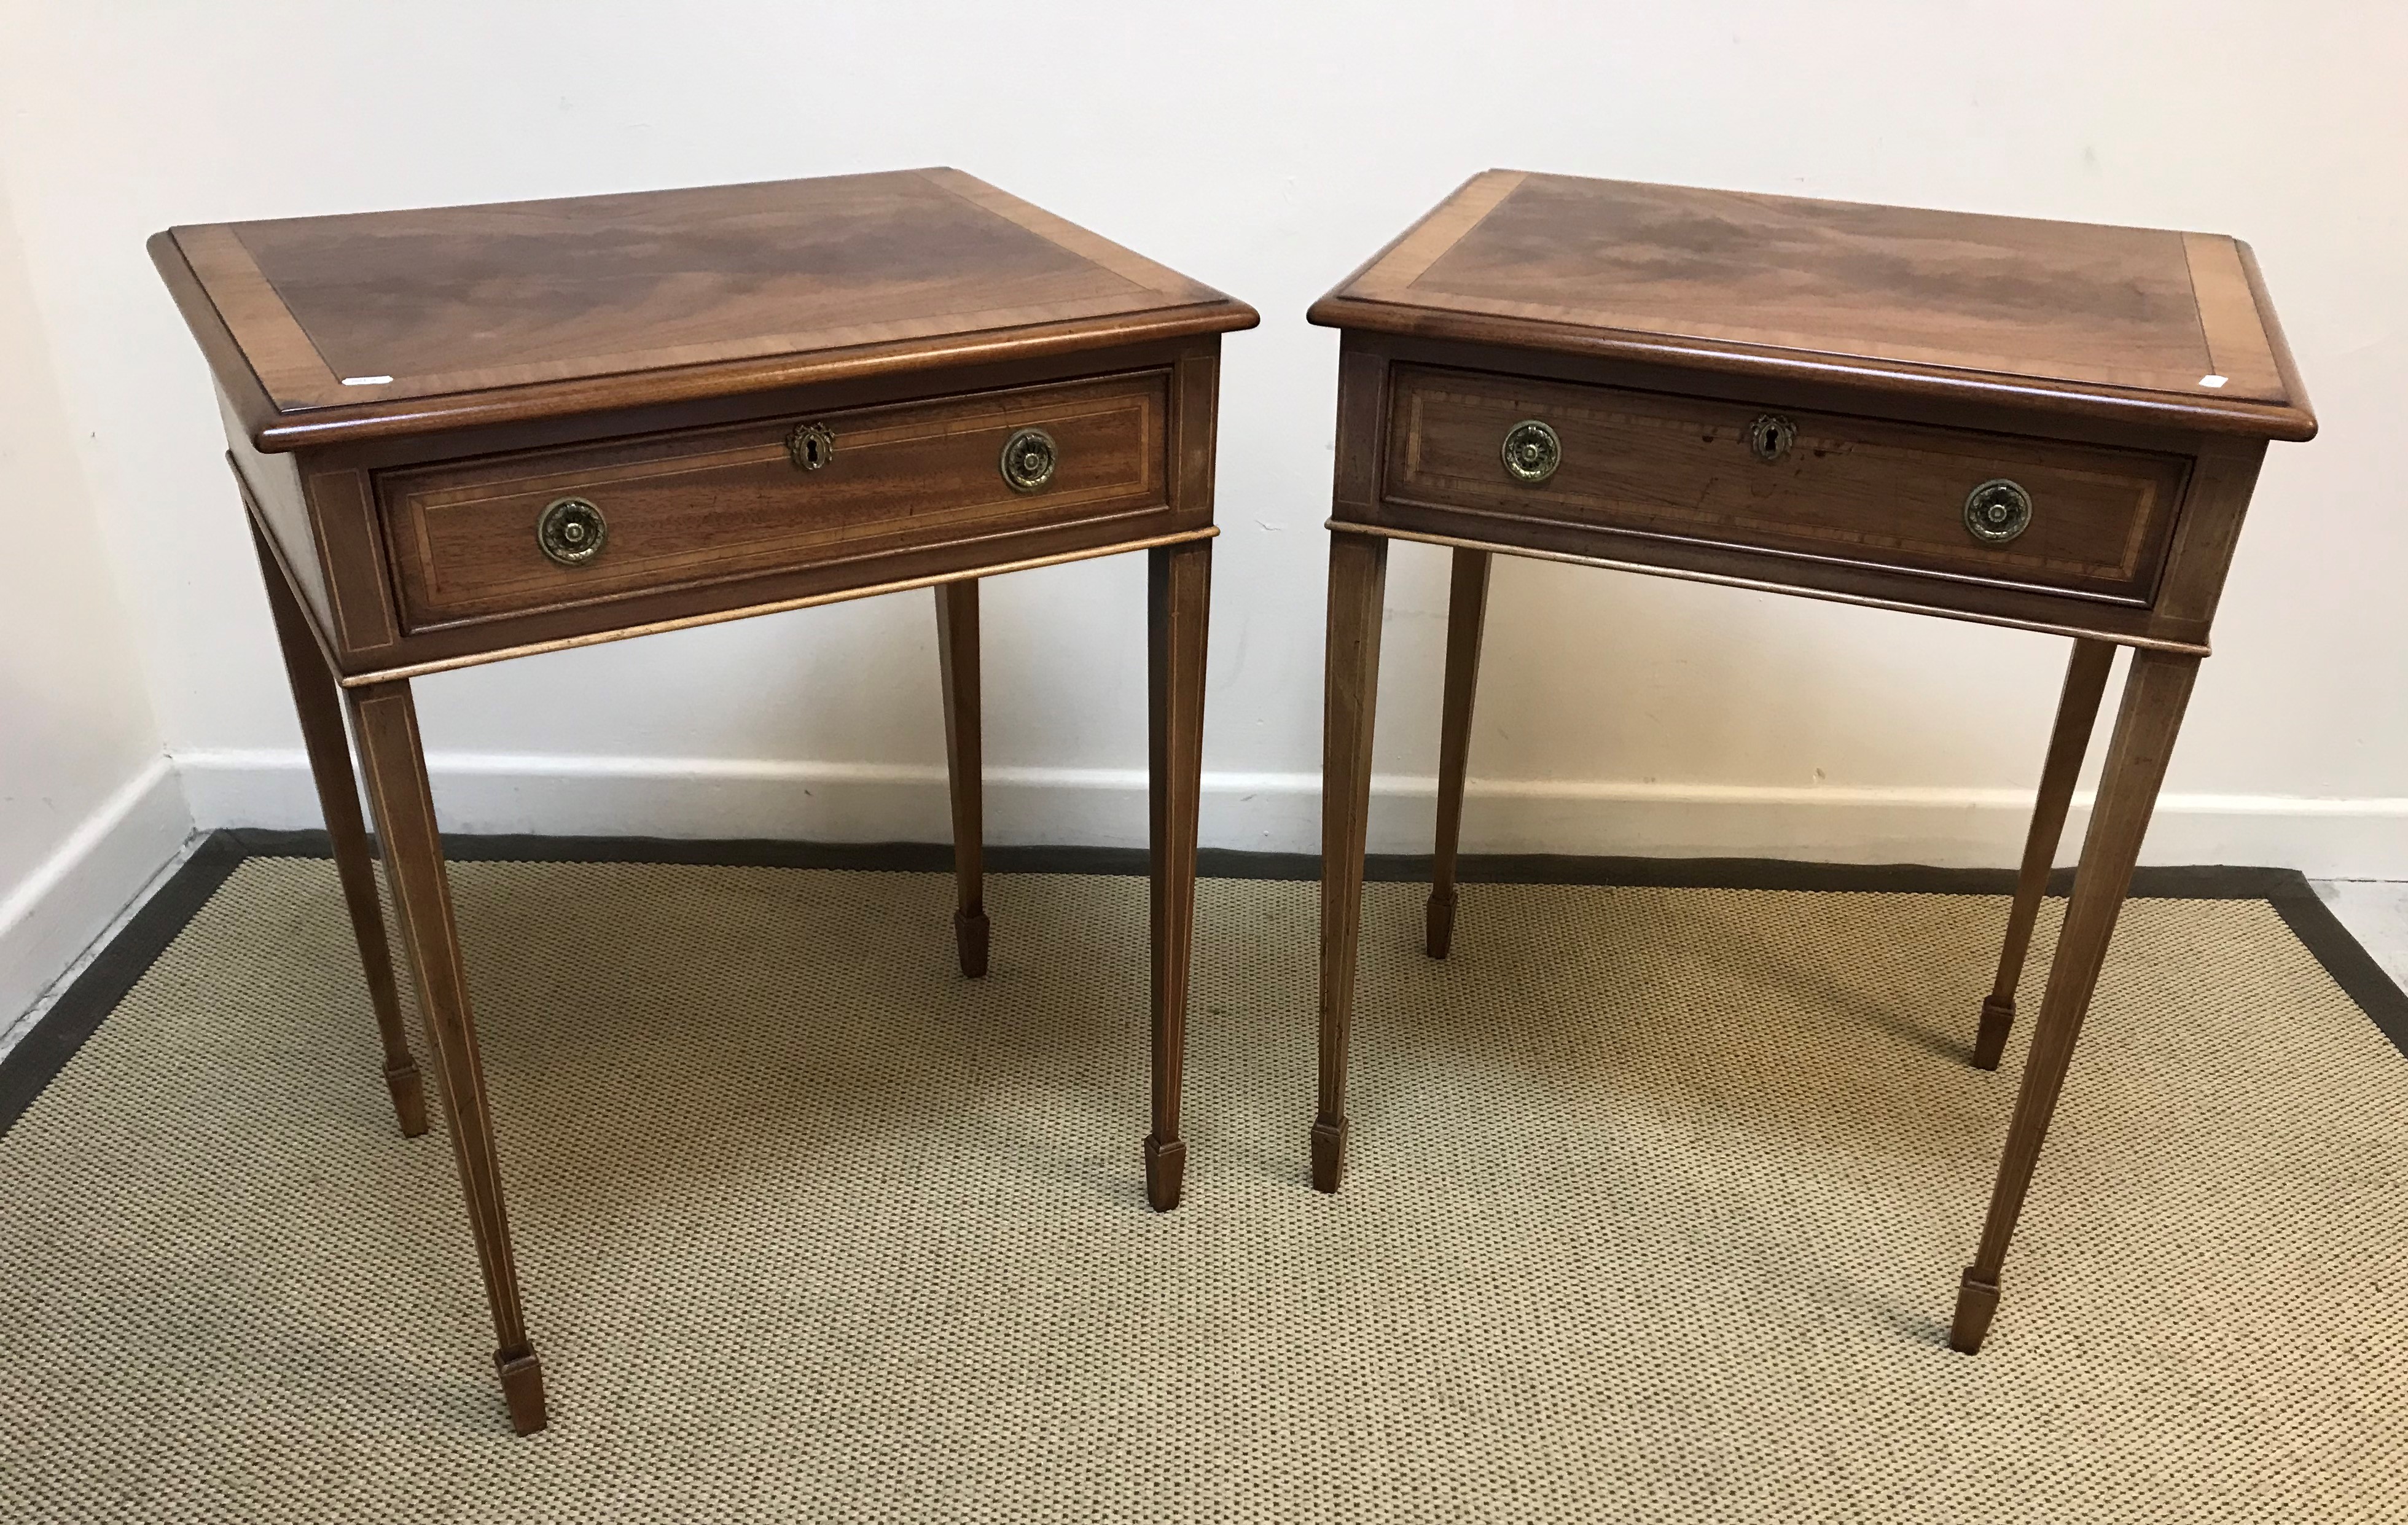 A pair of mahogany and inlaid lamp tables in the Regency taste, the cross-banded tops with moulded